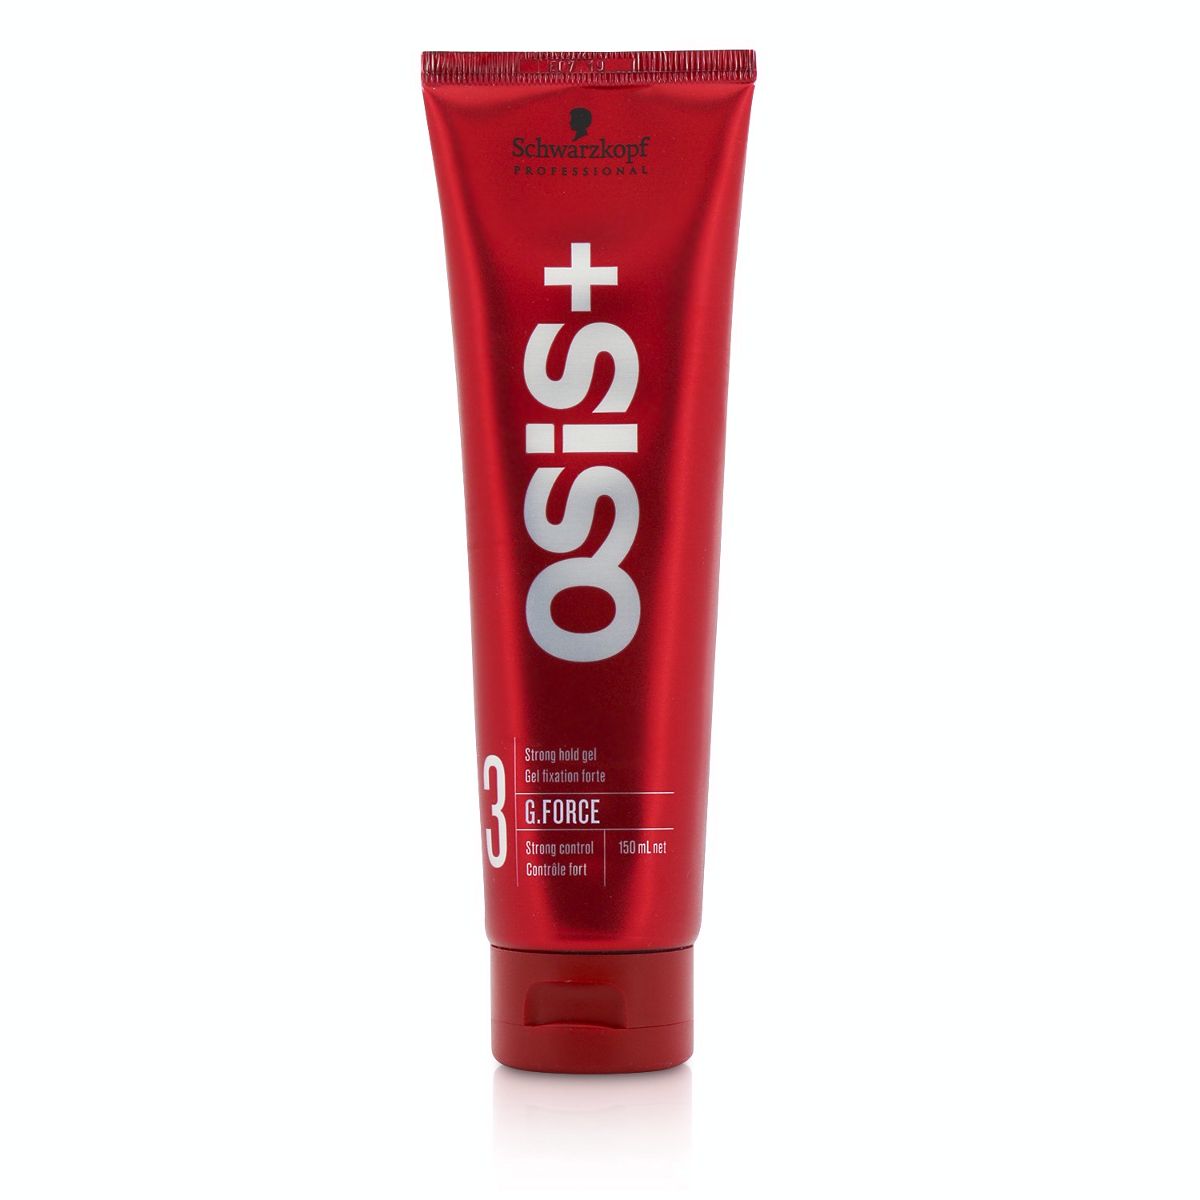 Osis+ G.Force 3 Strong Hold Gel (Strong Control) Schwarzkopf Image